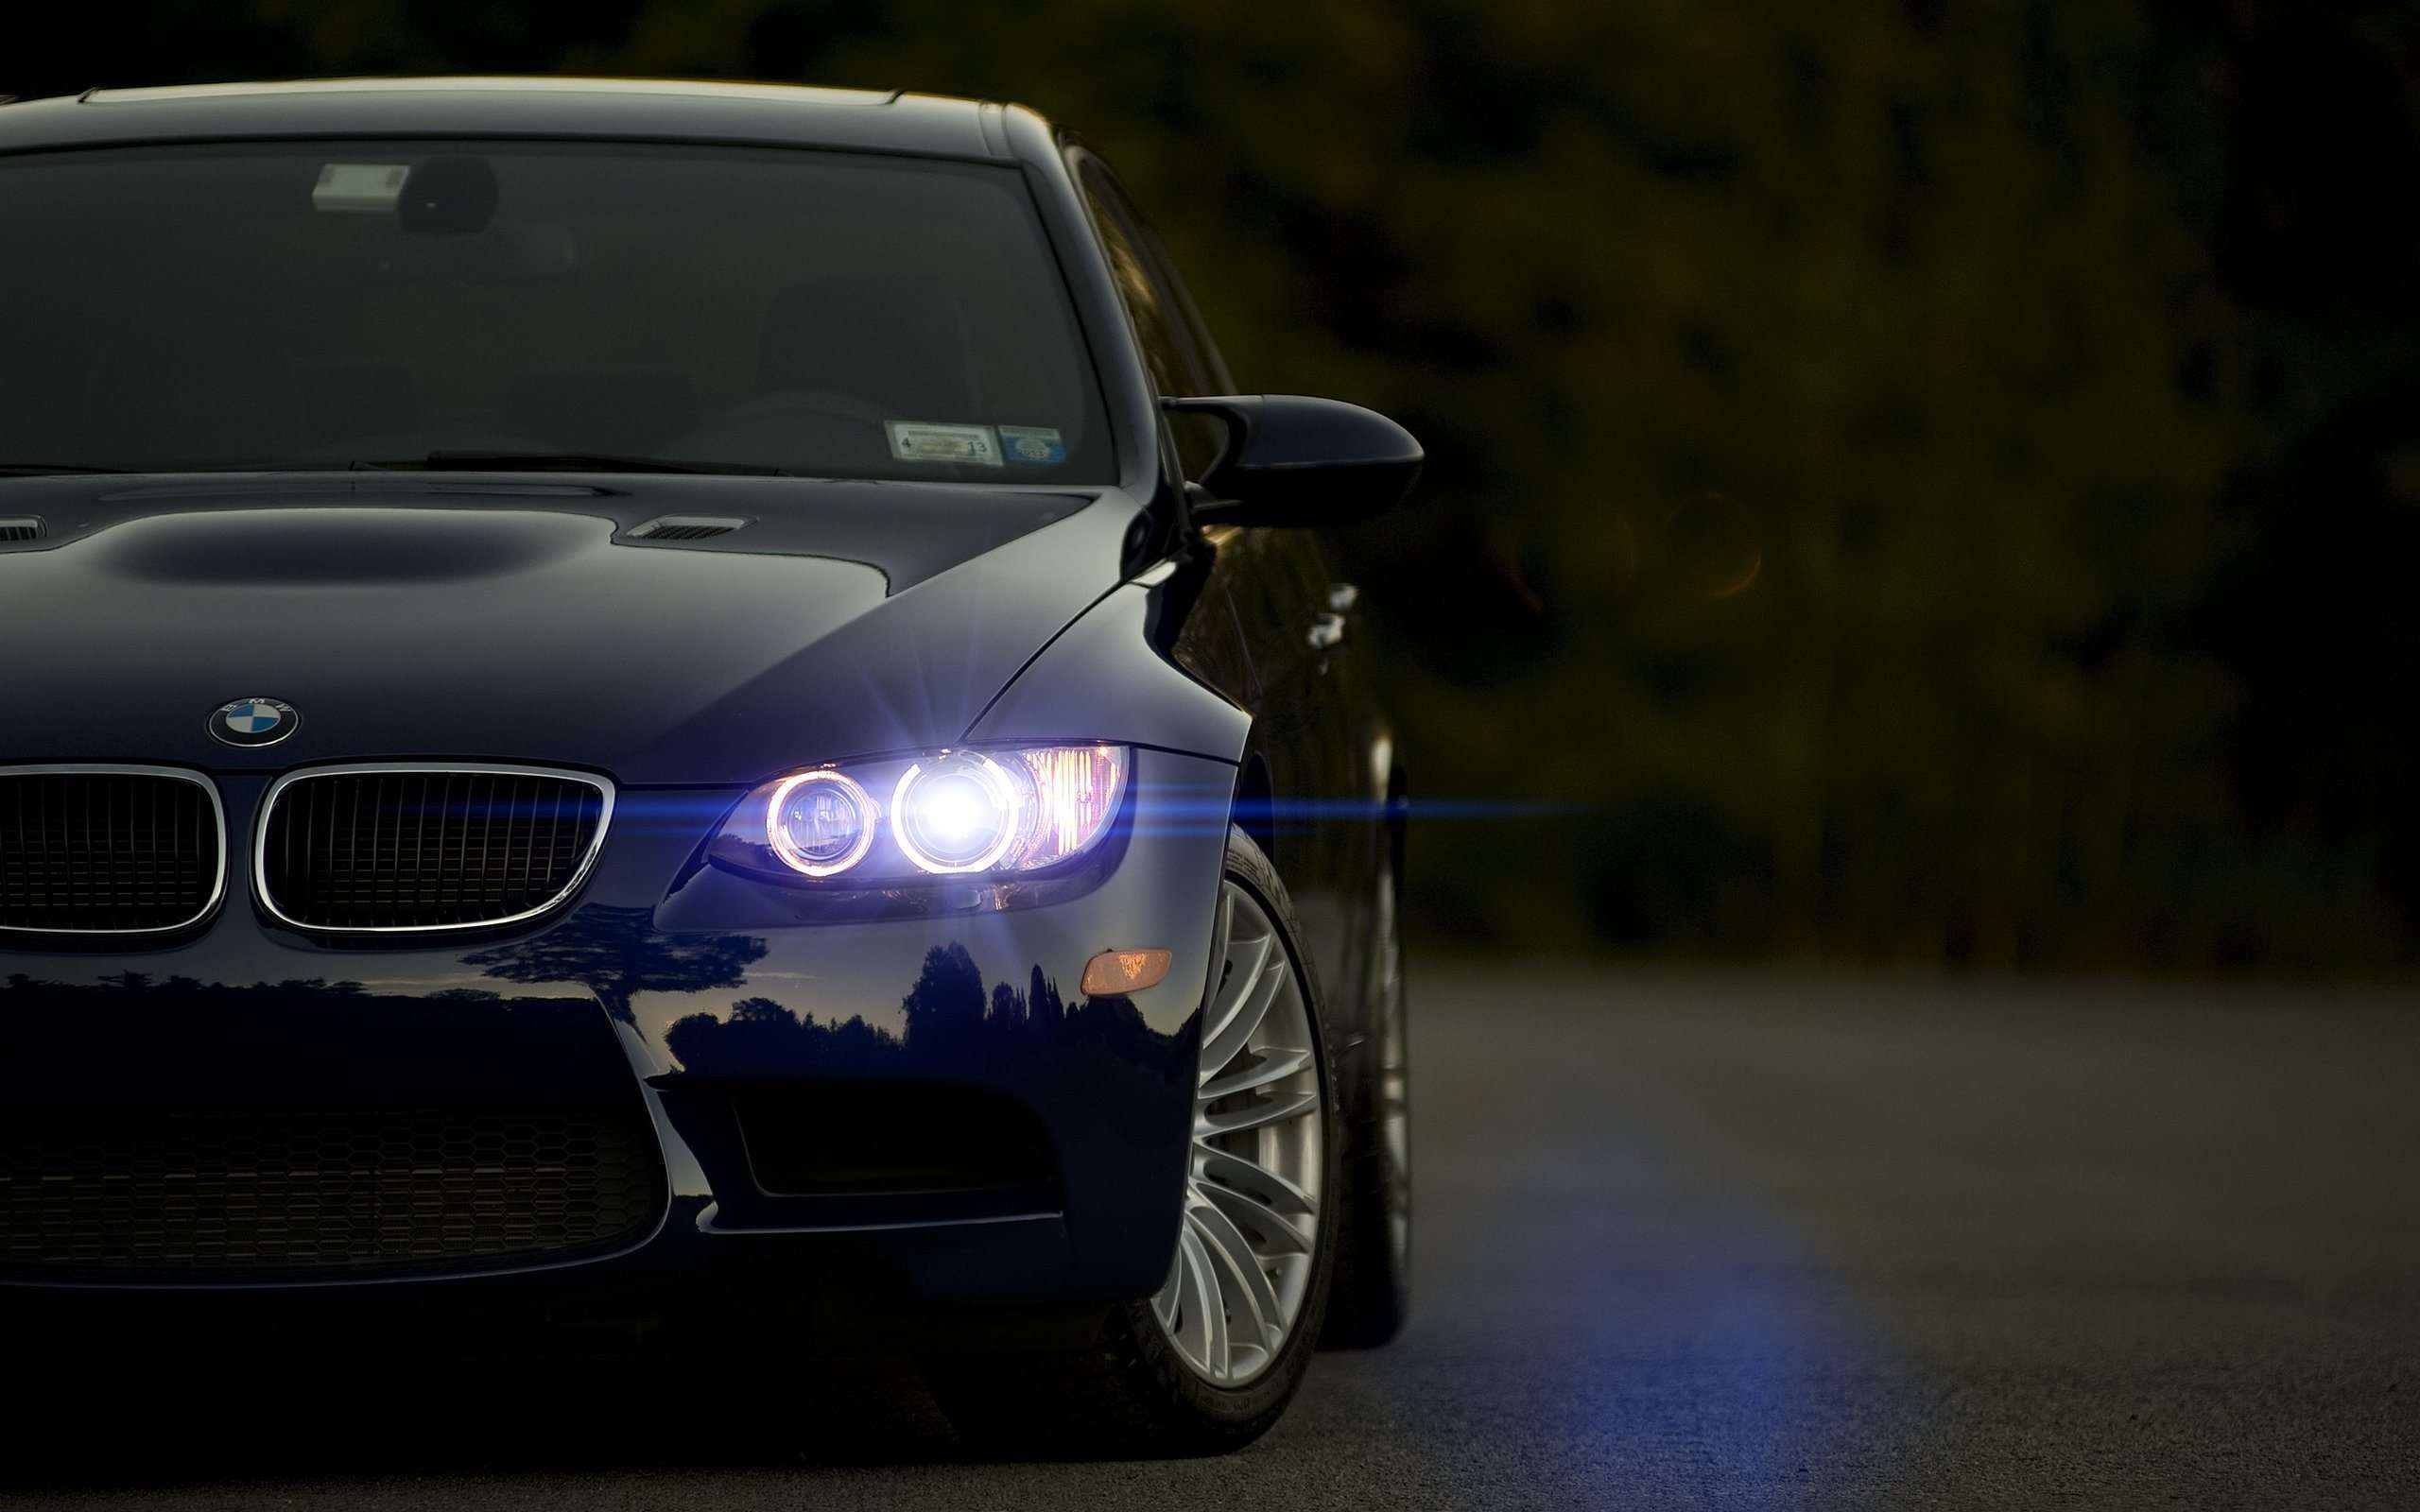 Hd wallpapers of bmw